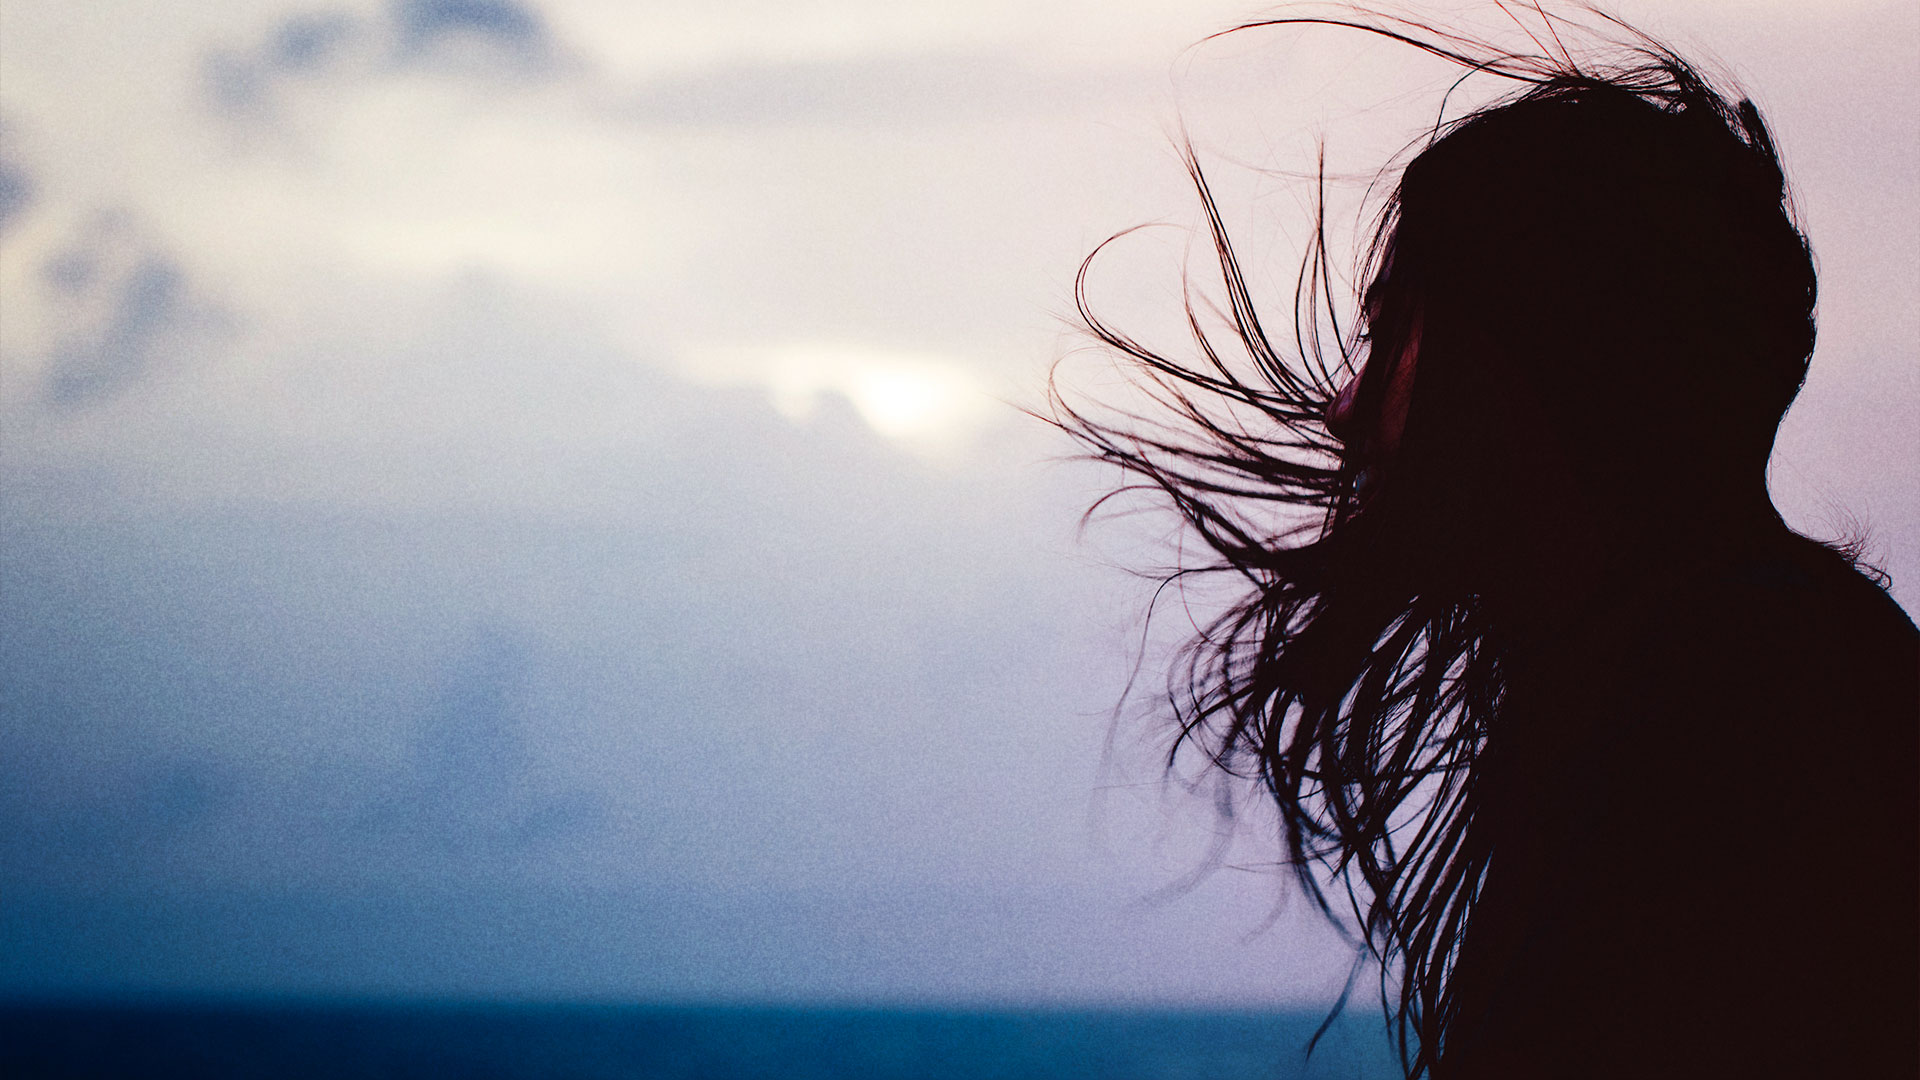 Girl with hair blowing in wind